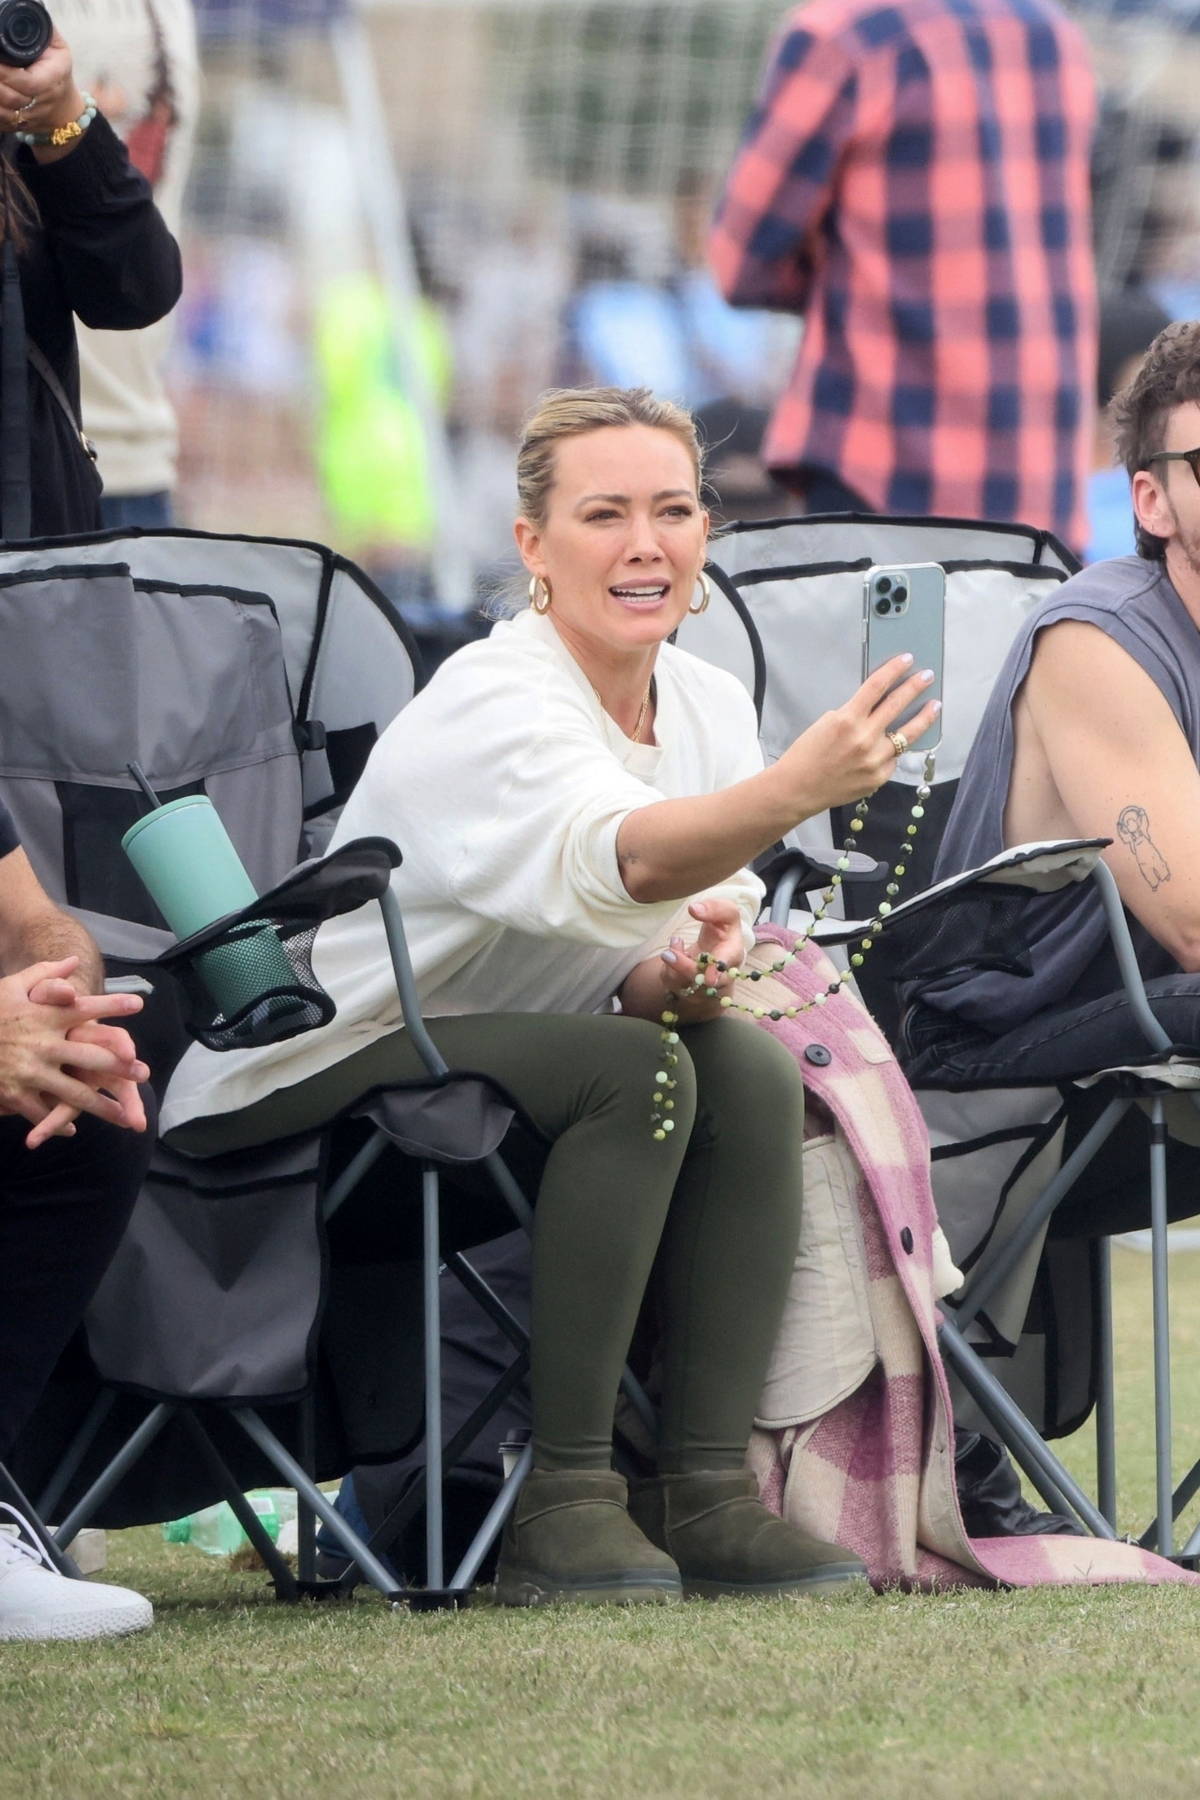 Hilary Duff looks fit in a white tank top and dark brown leggings